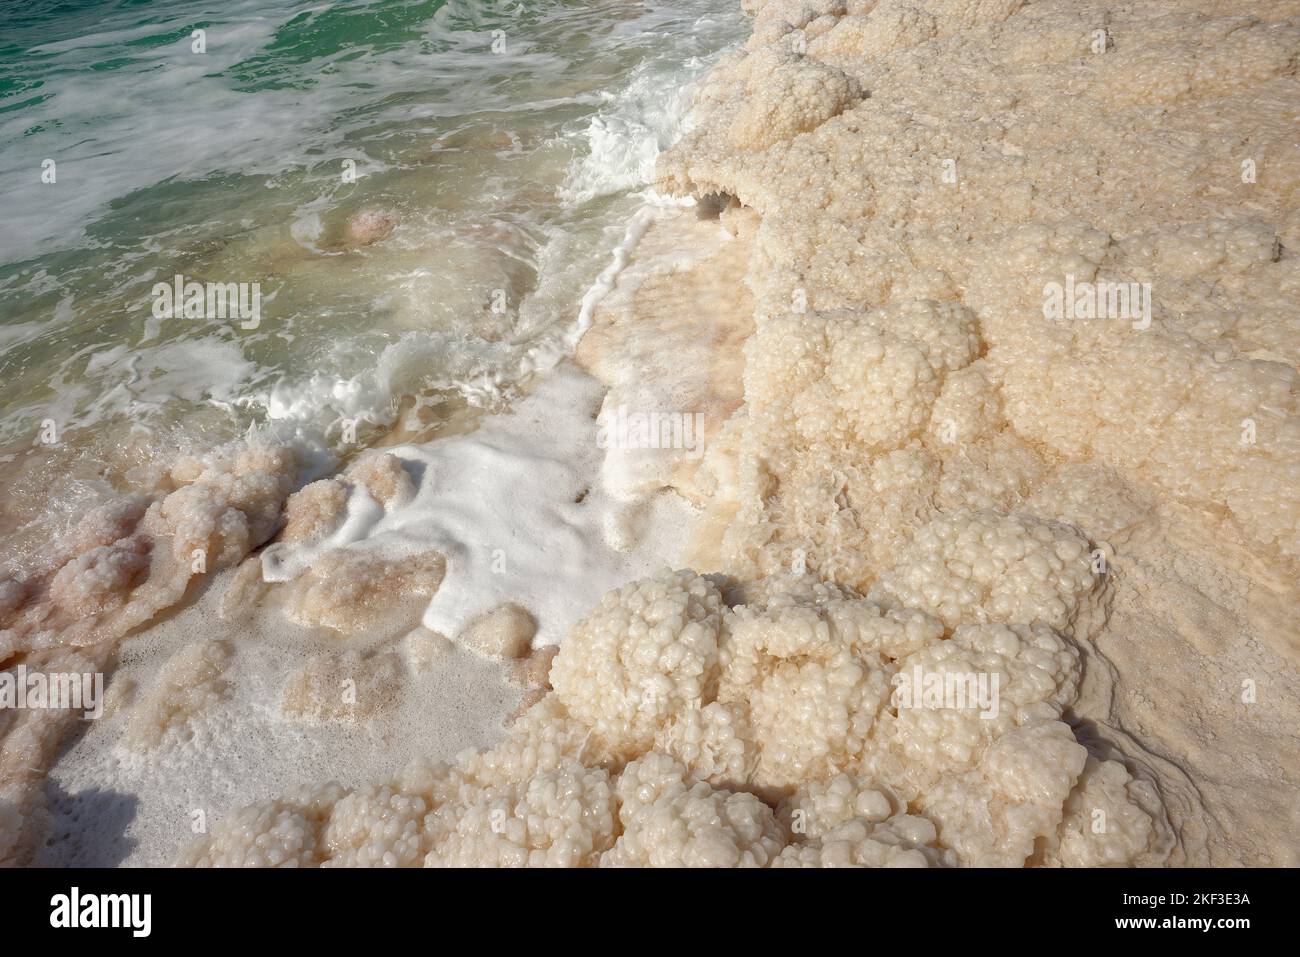 The Dead Sea, Jordan. Nothing alive exists in the Dead Sea. Over 400 metres below sea level. Stock Photo